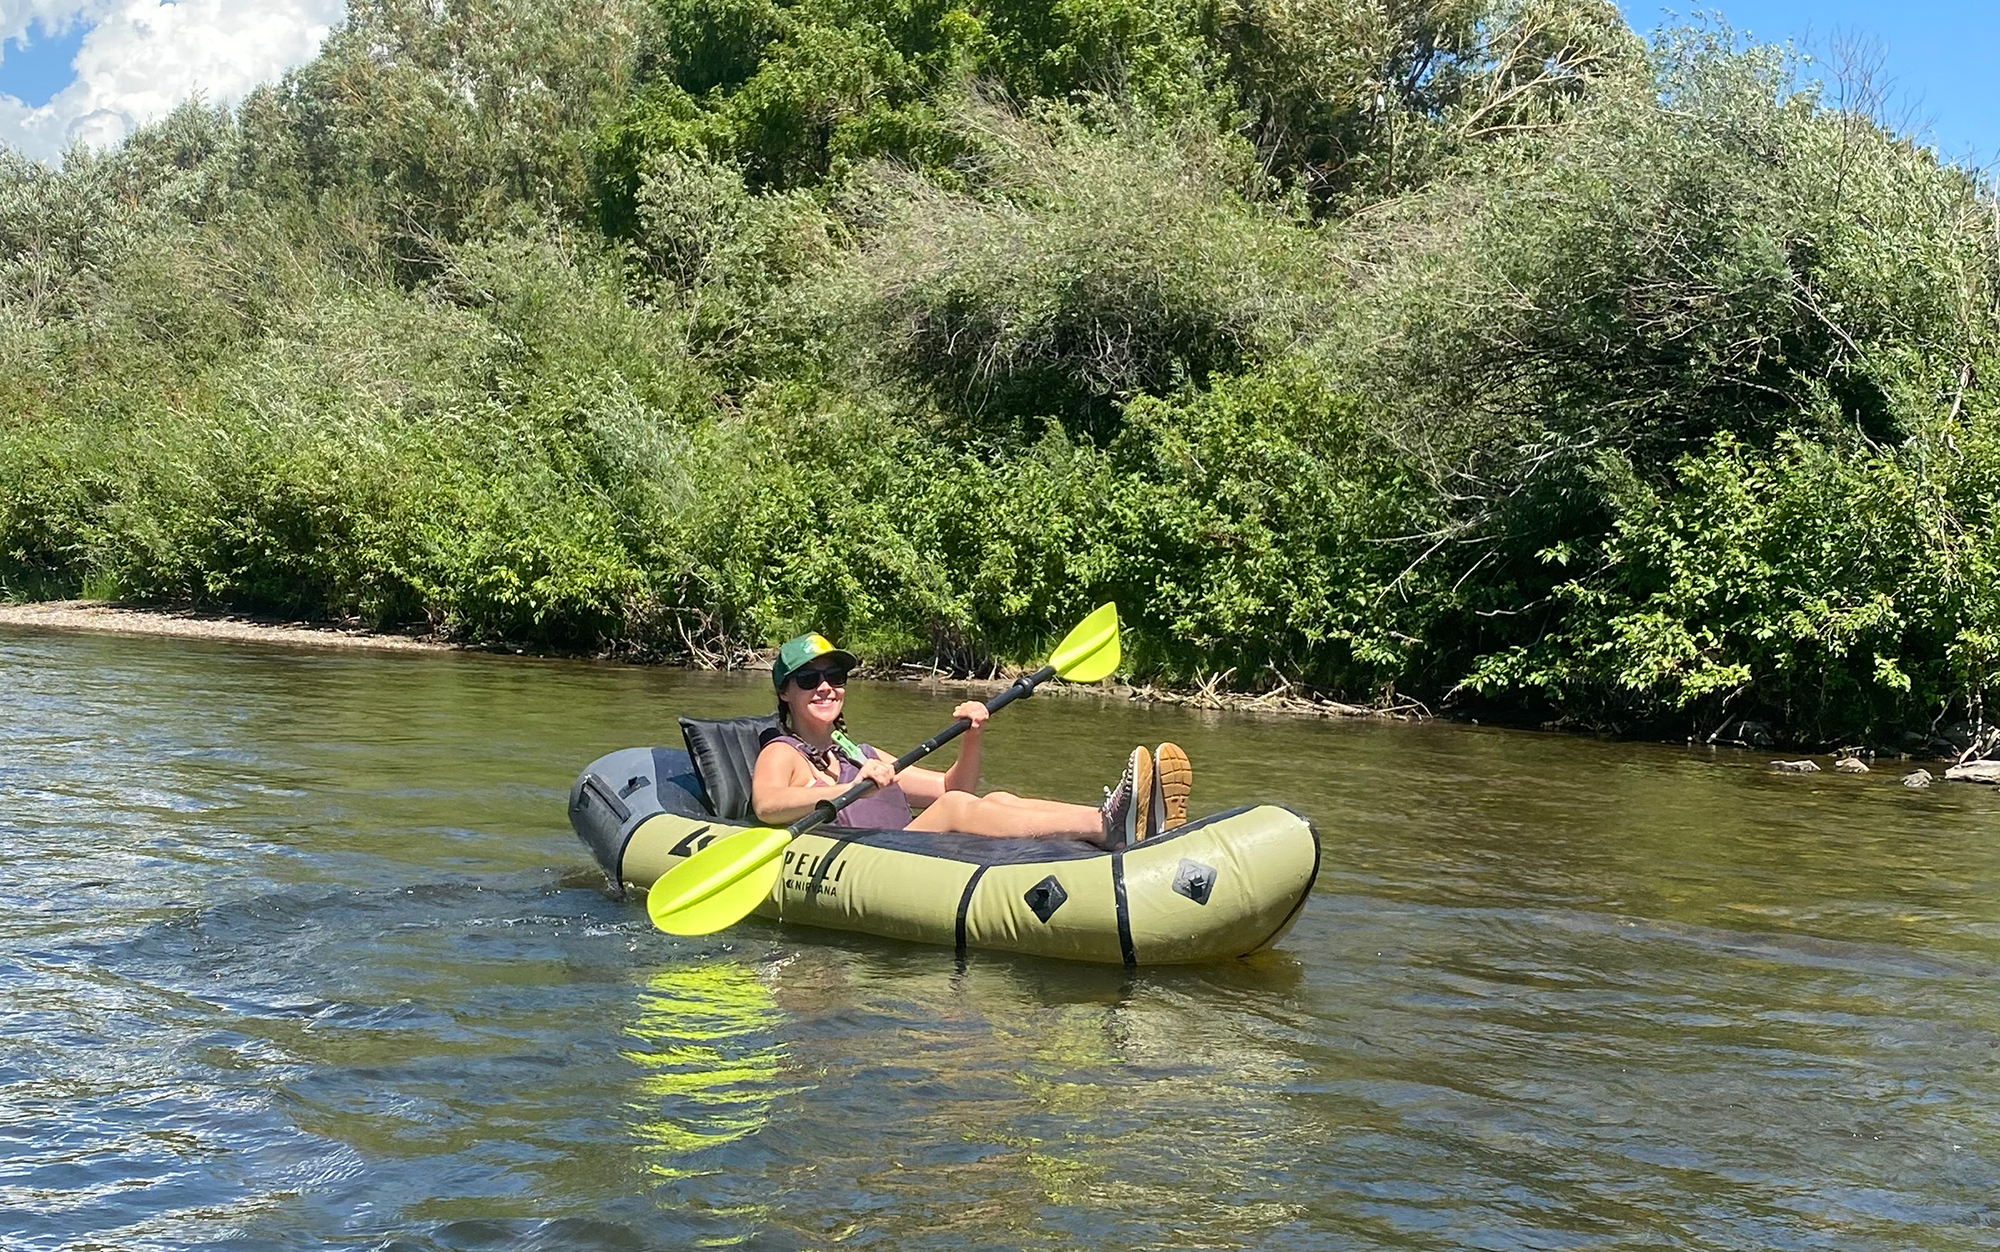 I kicked my feet up on top of a cooler for a comfortable river day.